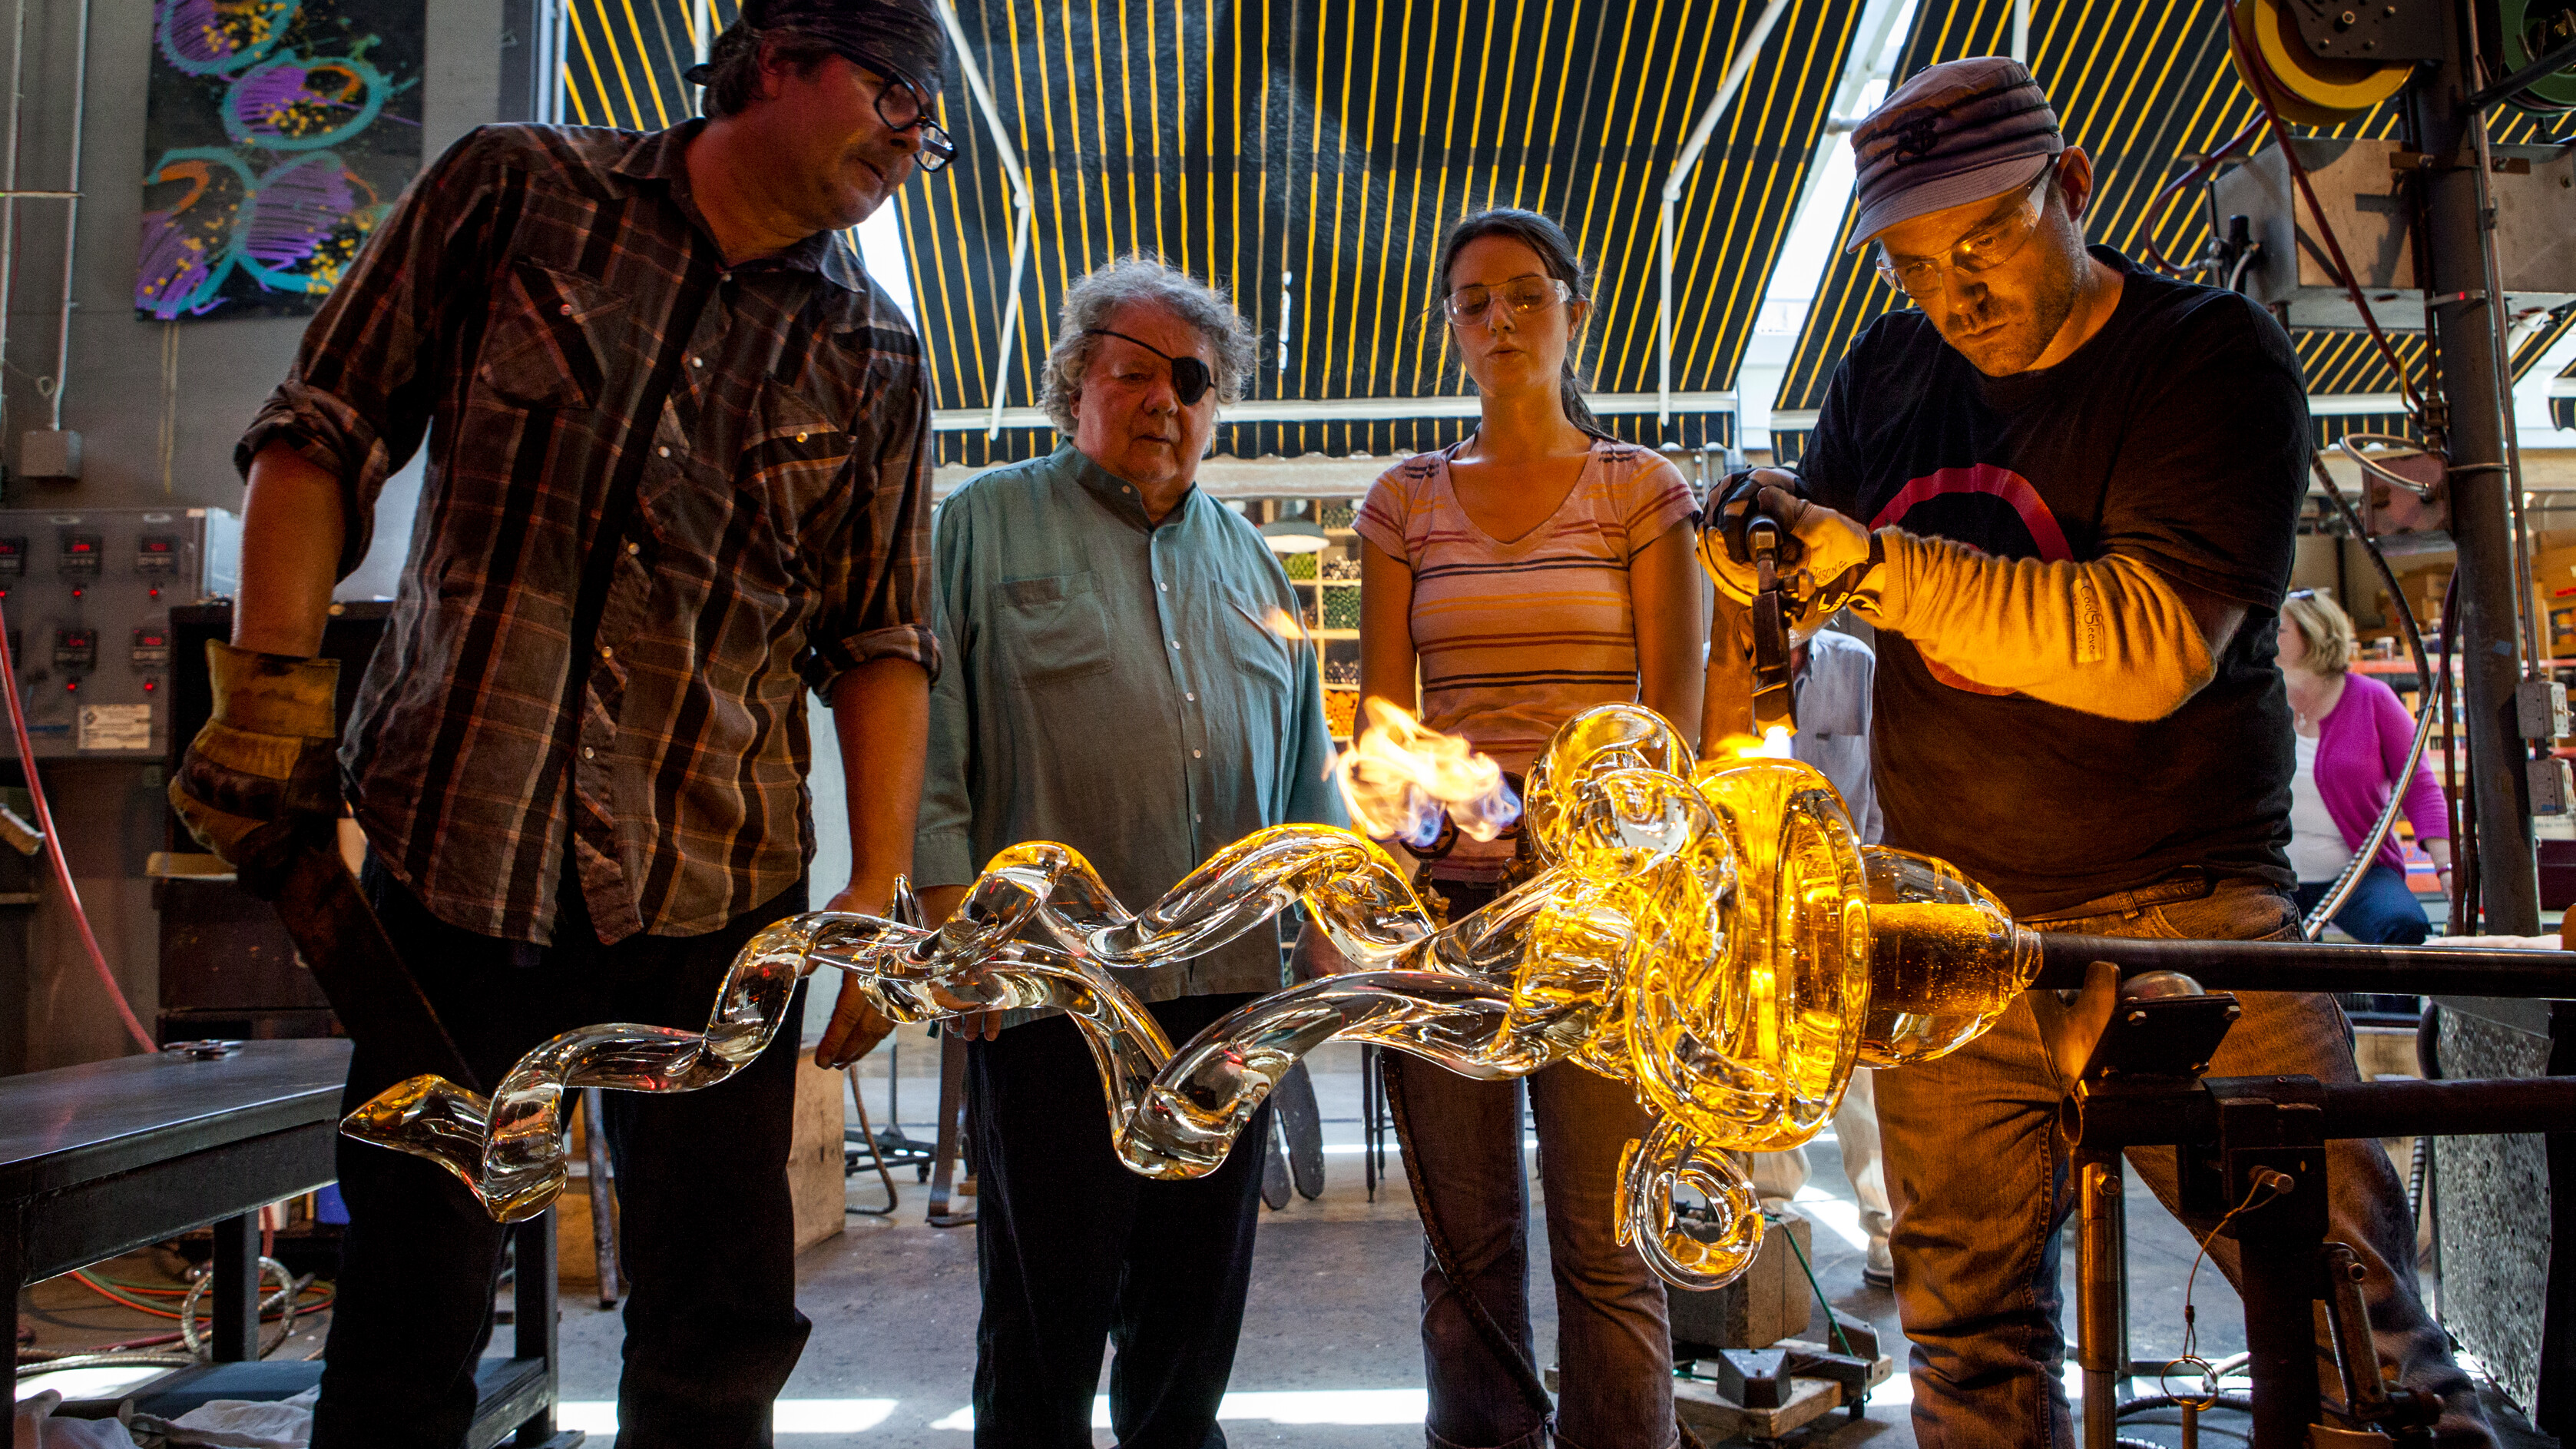 Check out Chihuly: Roll the Dice airing on a public television station near you!